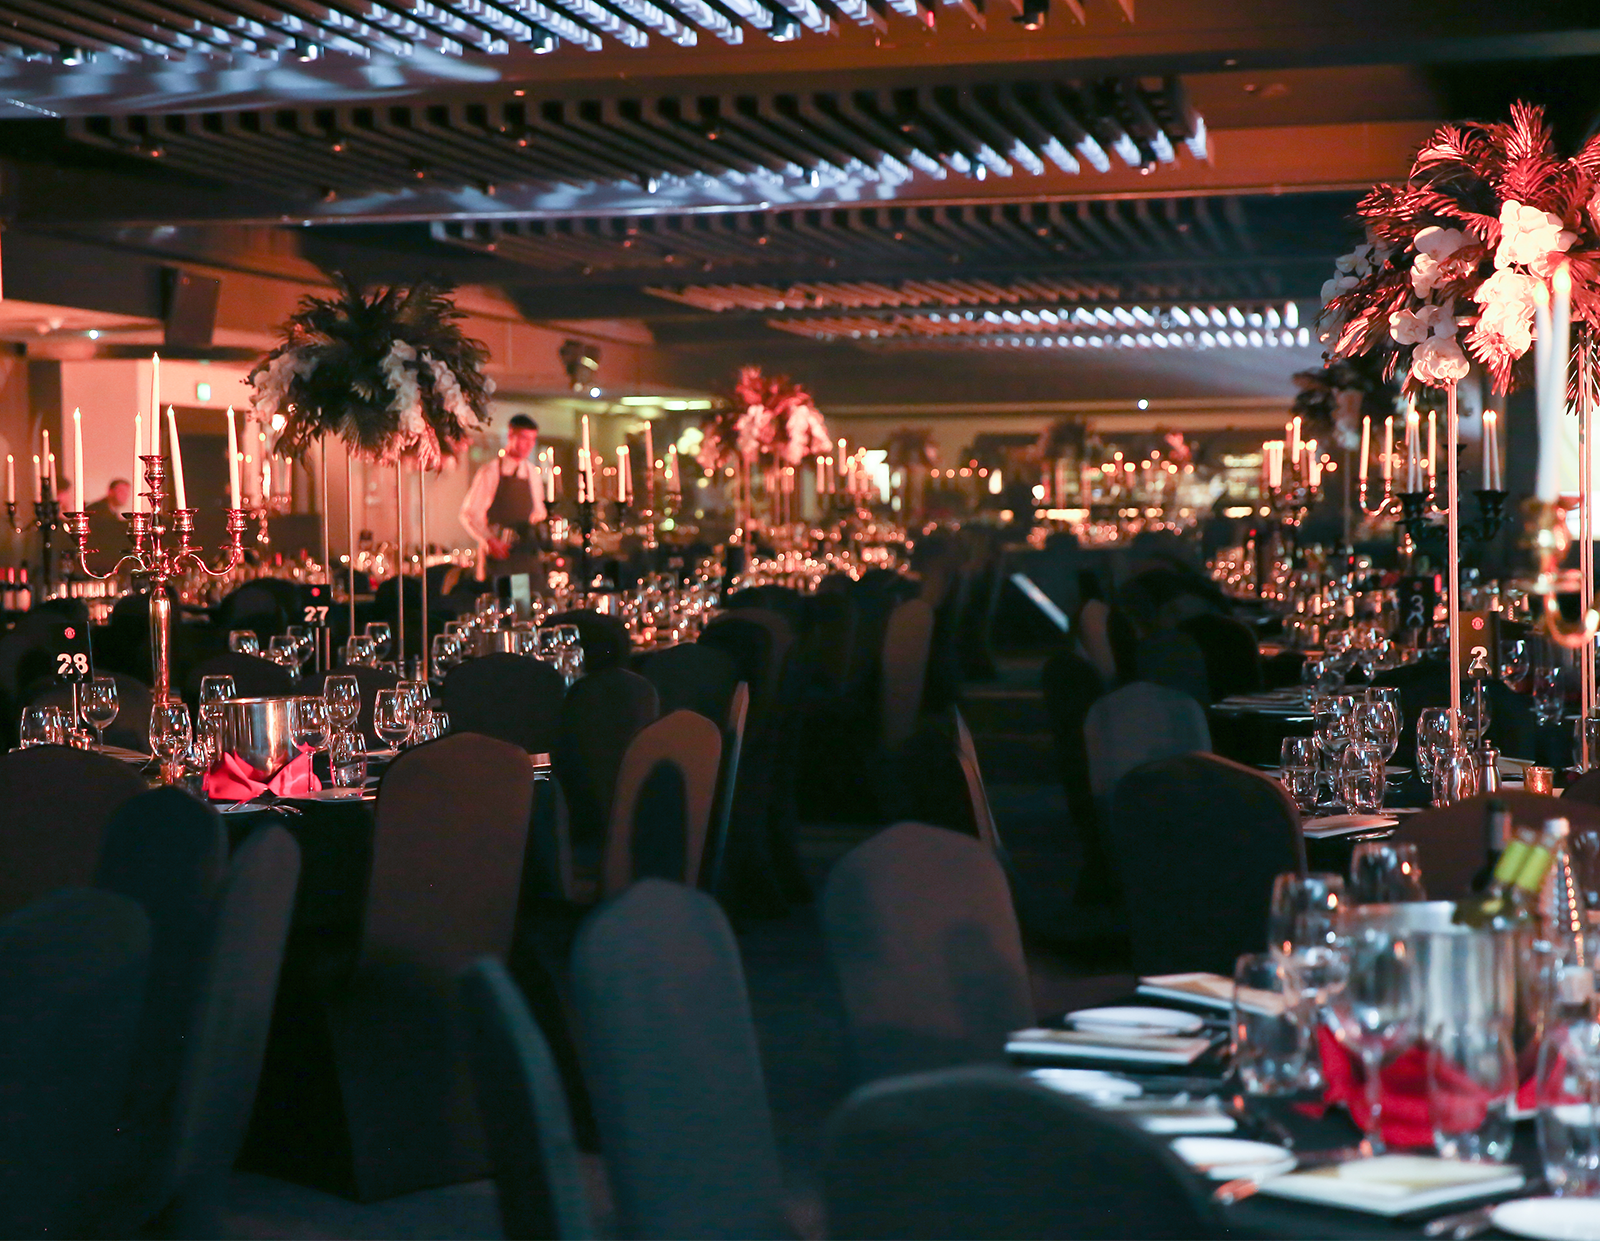 Finance Awards North West evening ceremony three course dinner in candle-lit manchester cathedral in city centre